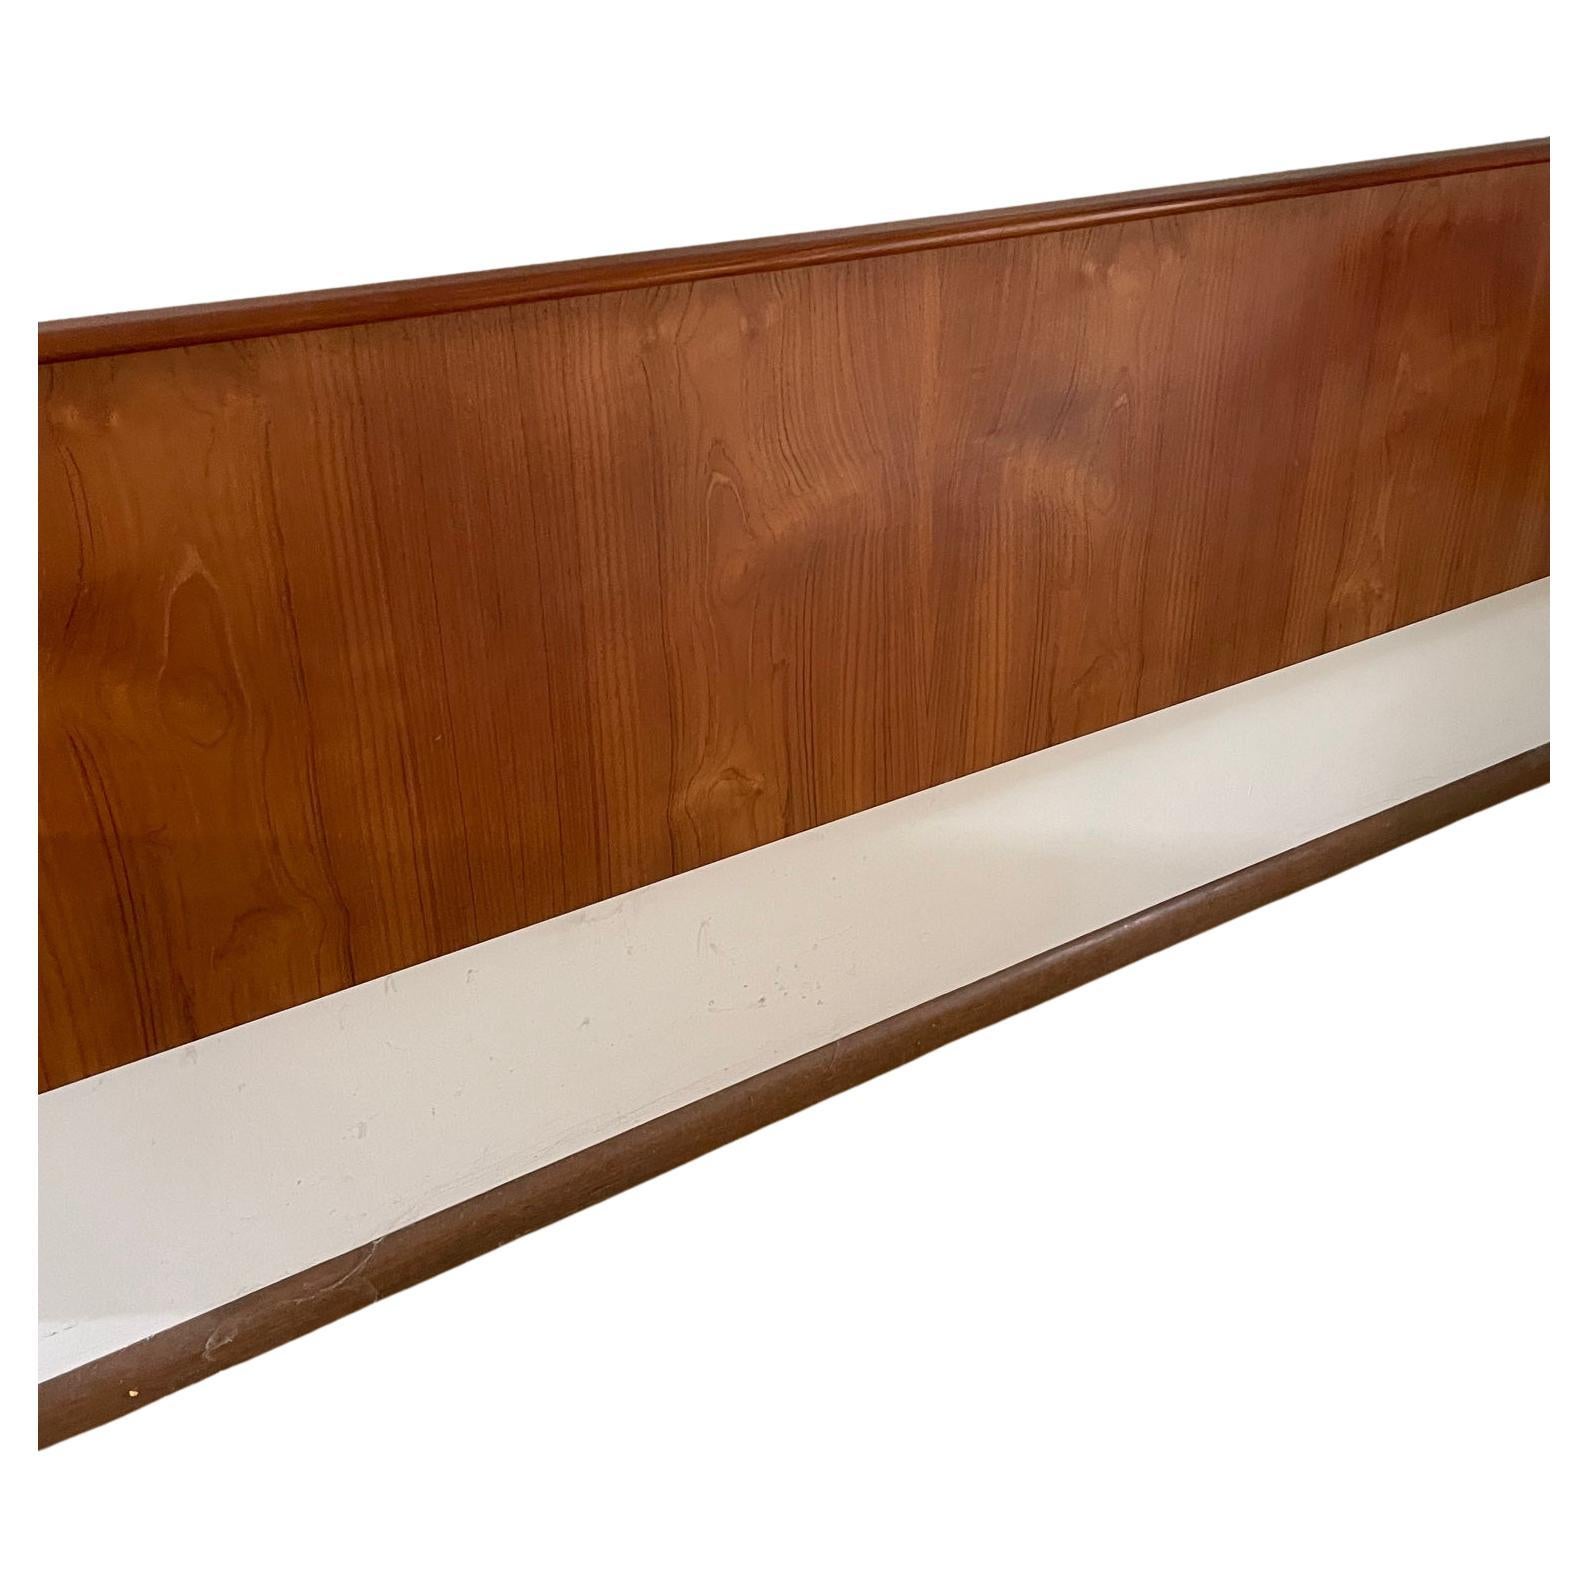 Mid Century Modern teak king size wall mounted headboard with two mounted stands. Each stand has a drawer with carved handle. Very good condition. Dimensions: 2